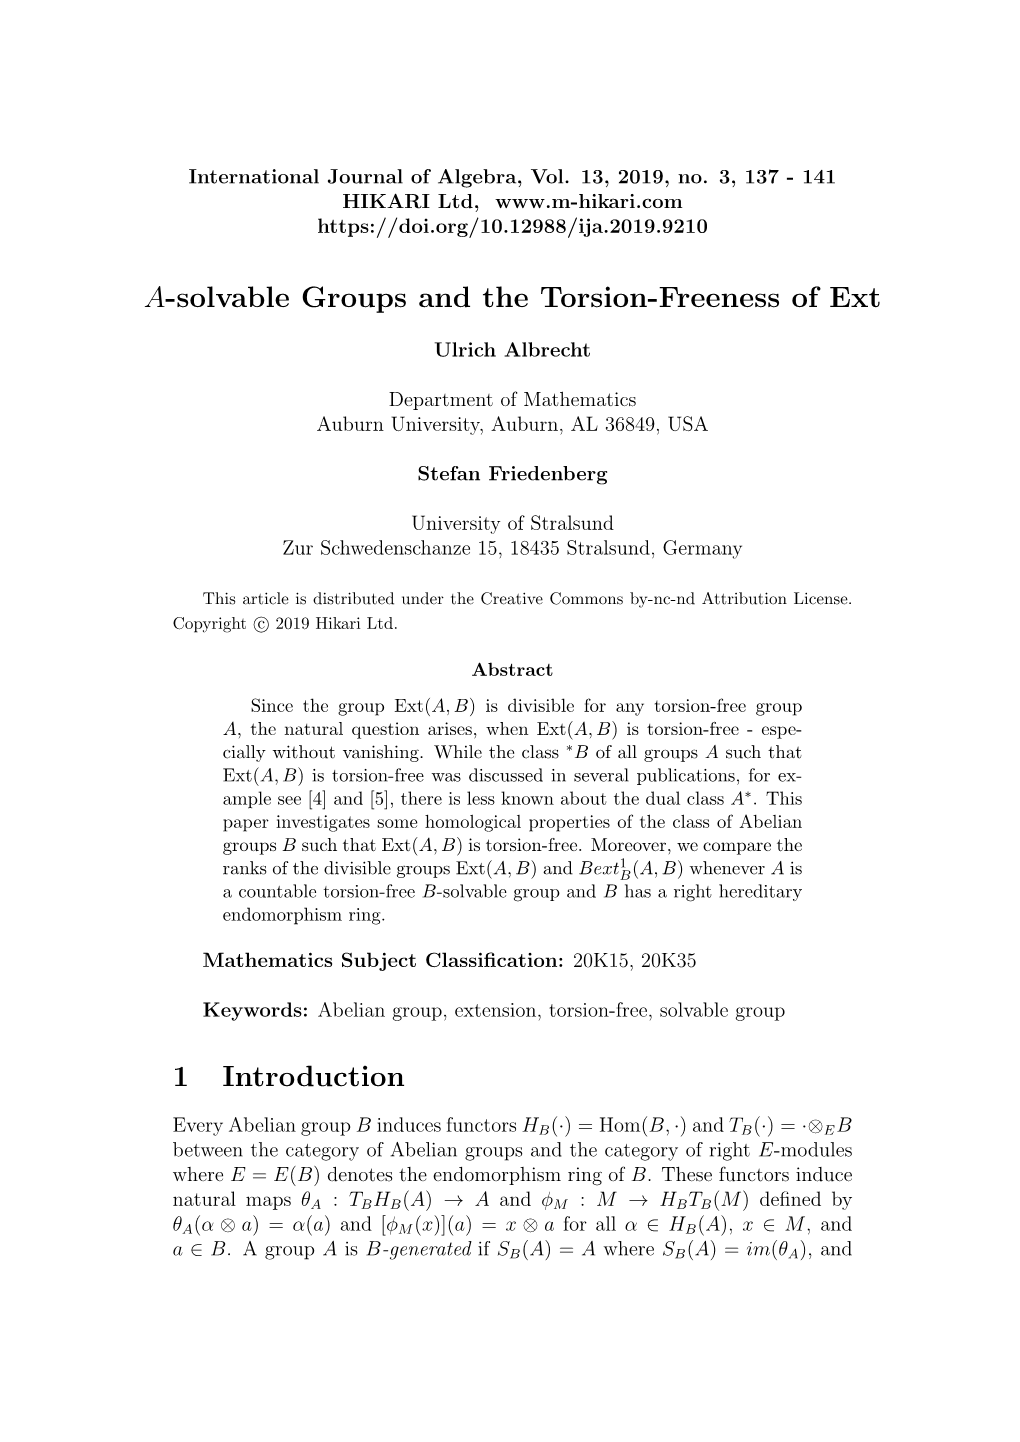 A-Solvable Groups and the Torsion-Freeness of Ext